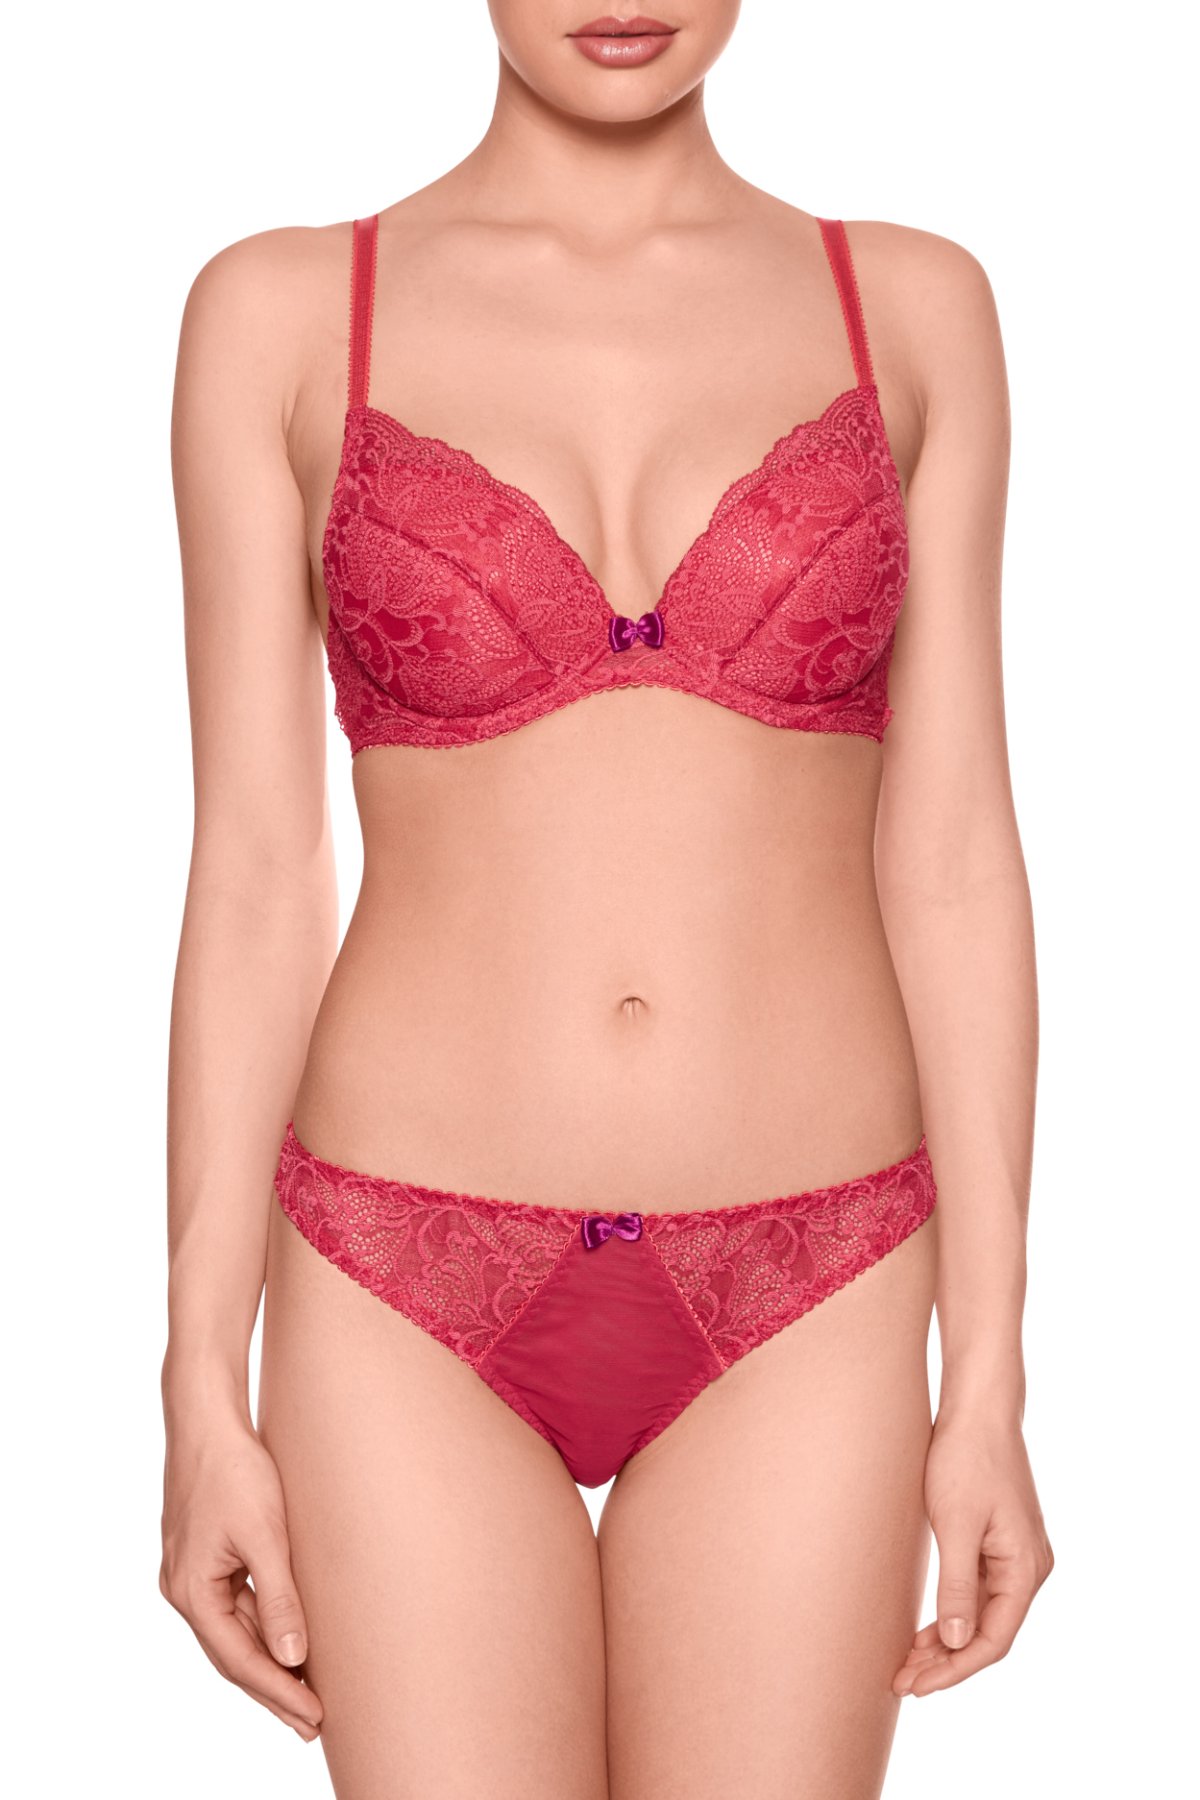 Shop Set of 2 - Bow Detail Push Up Balconette Bras with Adjustable Straps  Online